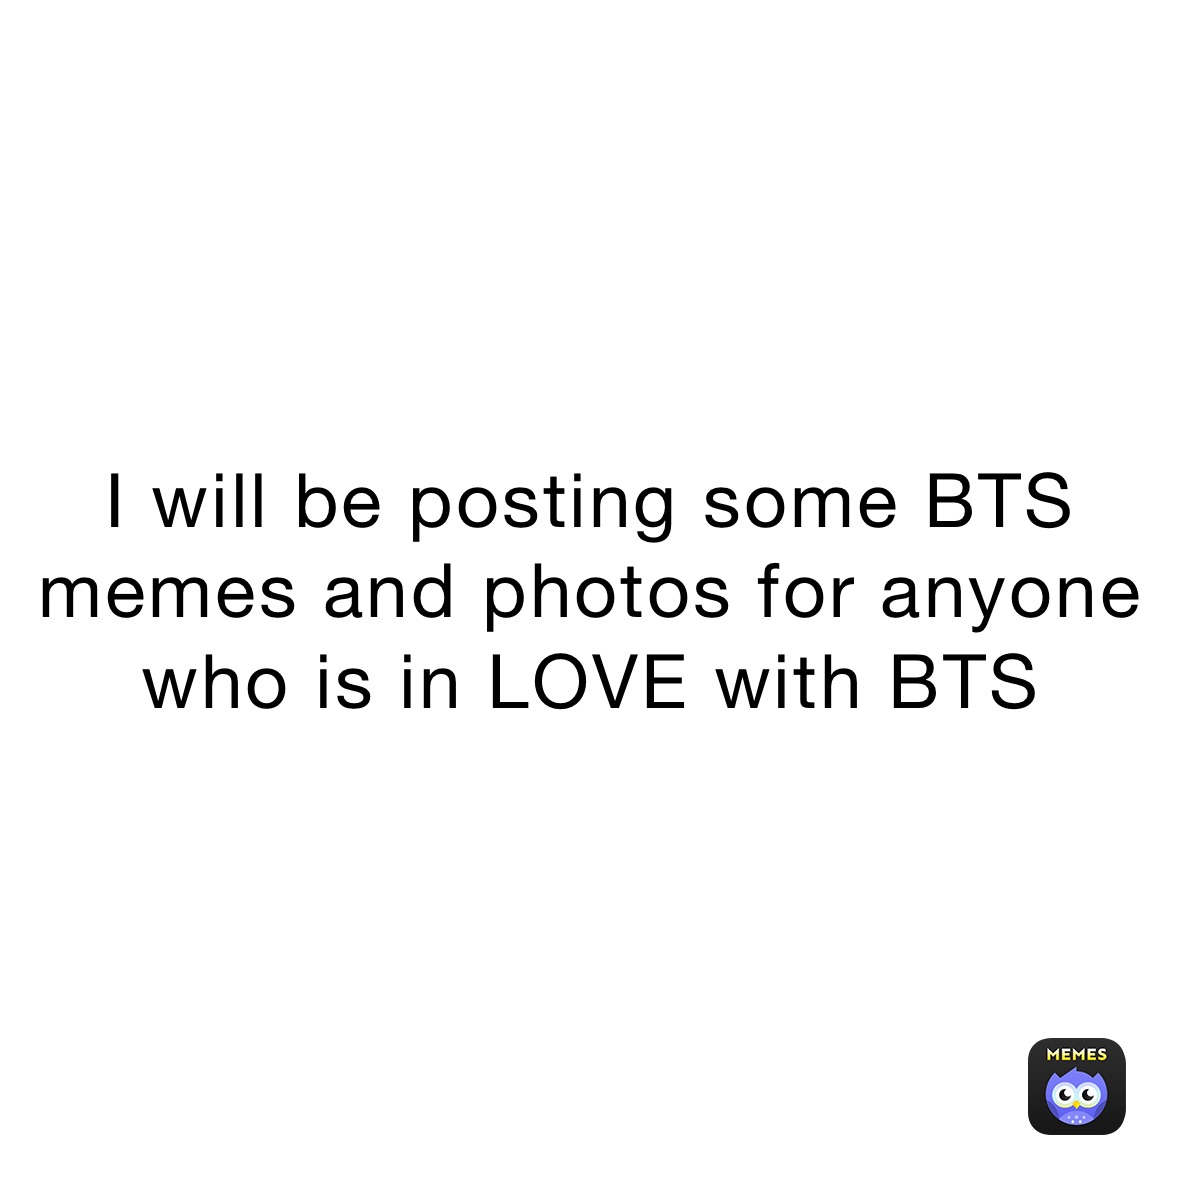 I will be posting some BTS memes and photos for anyone who is in LOVE with bts